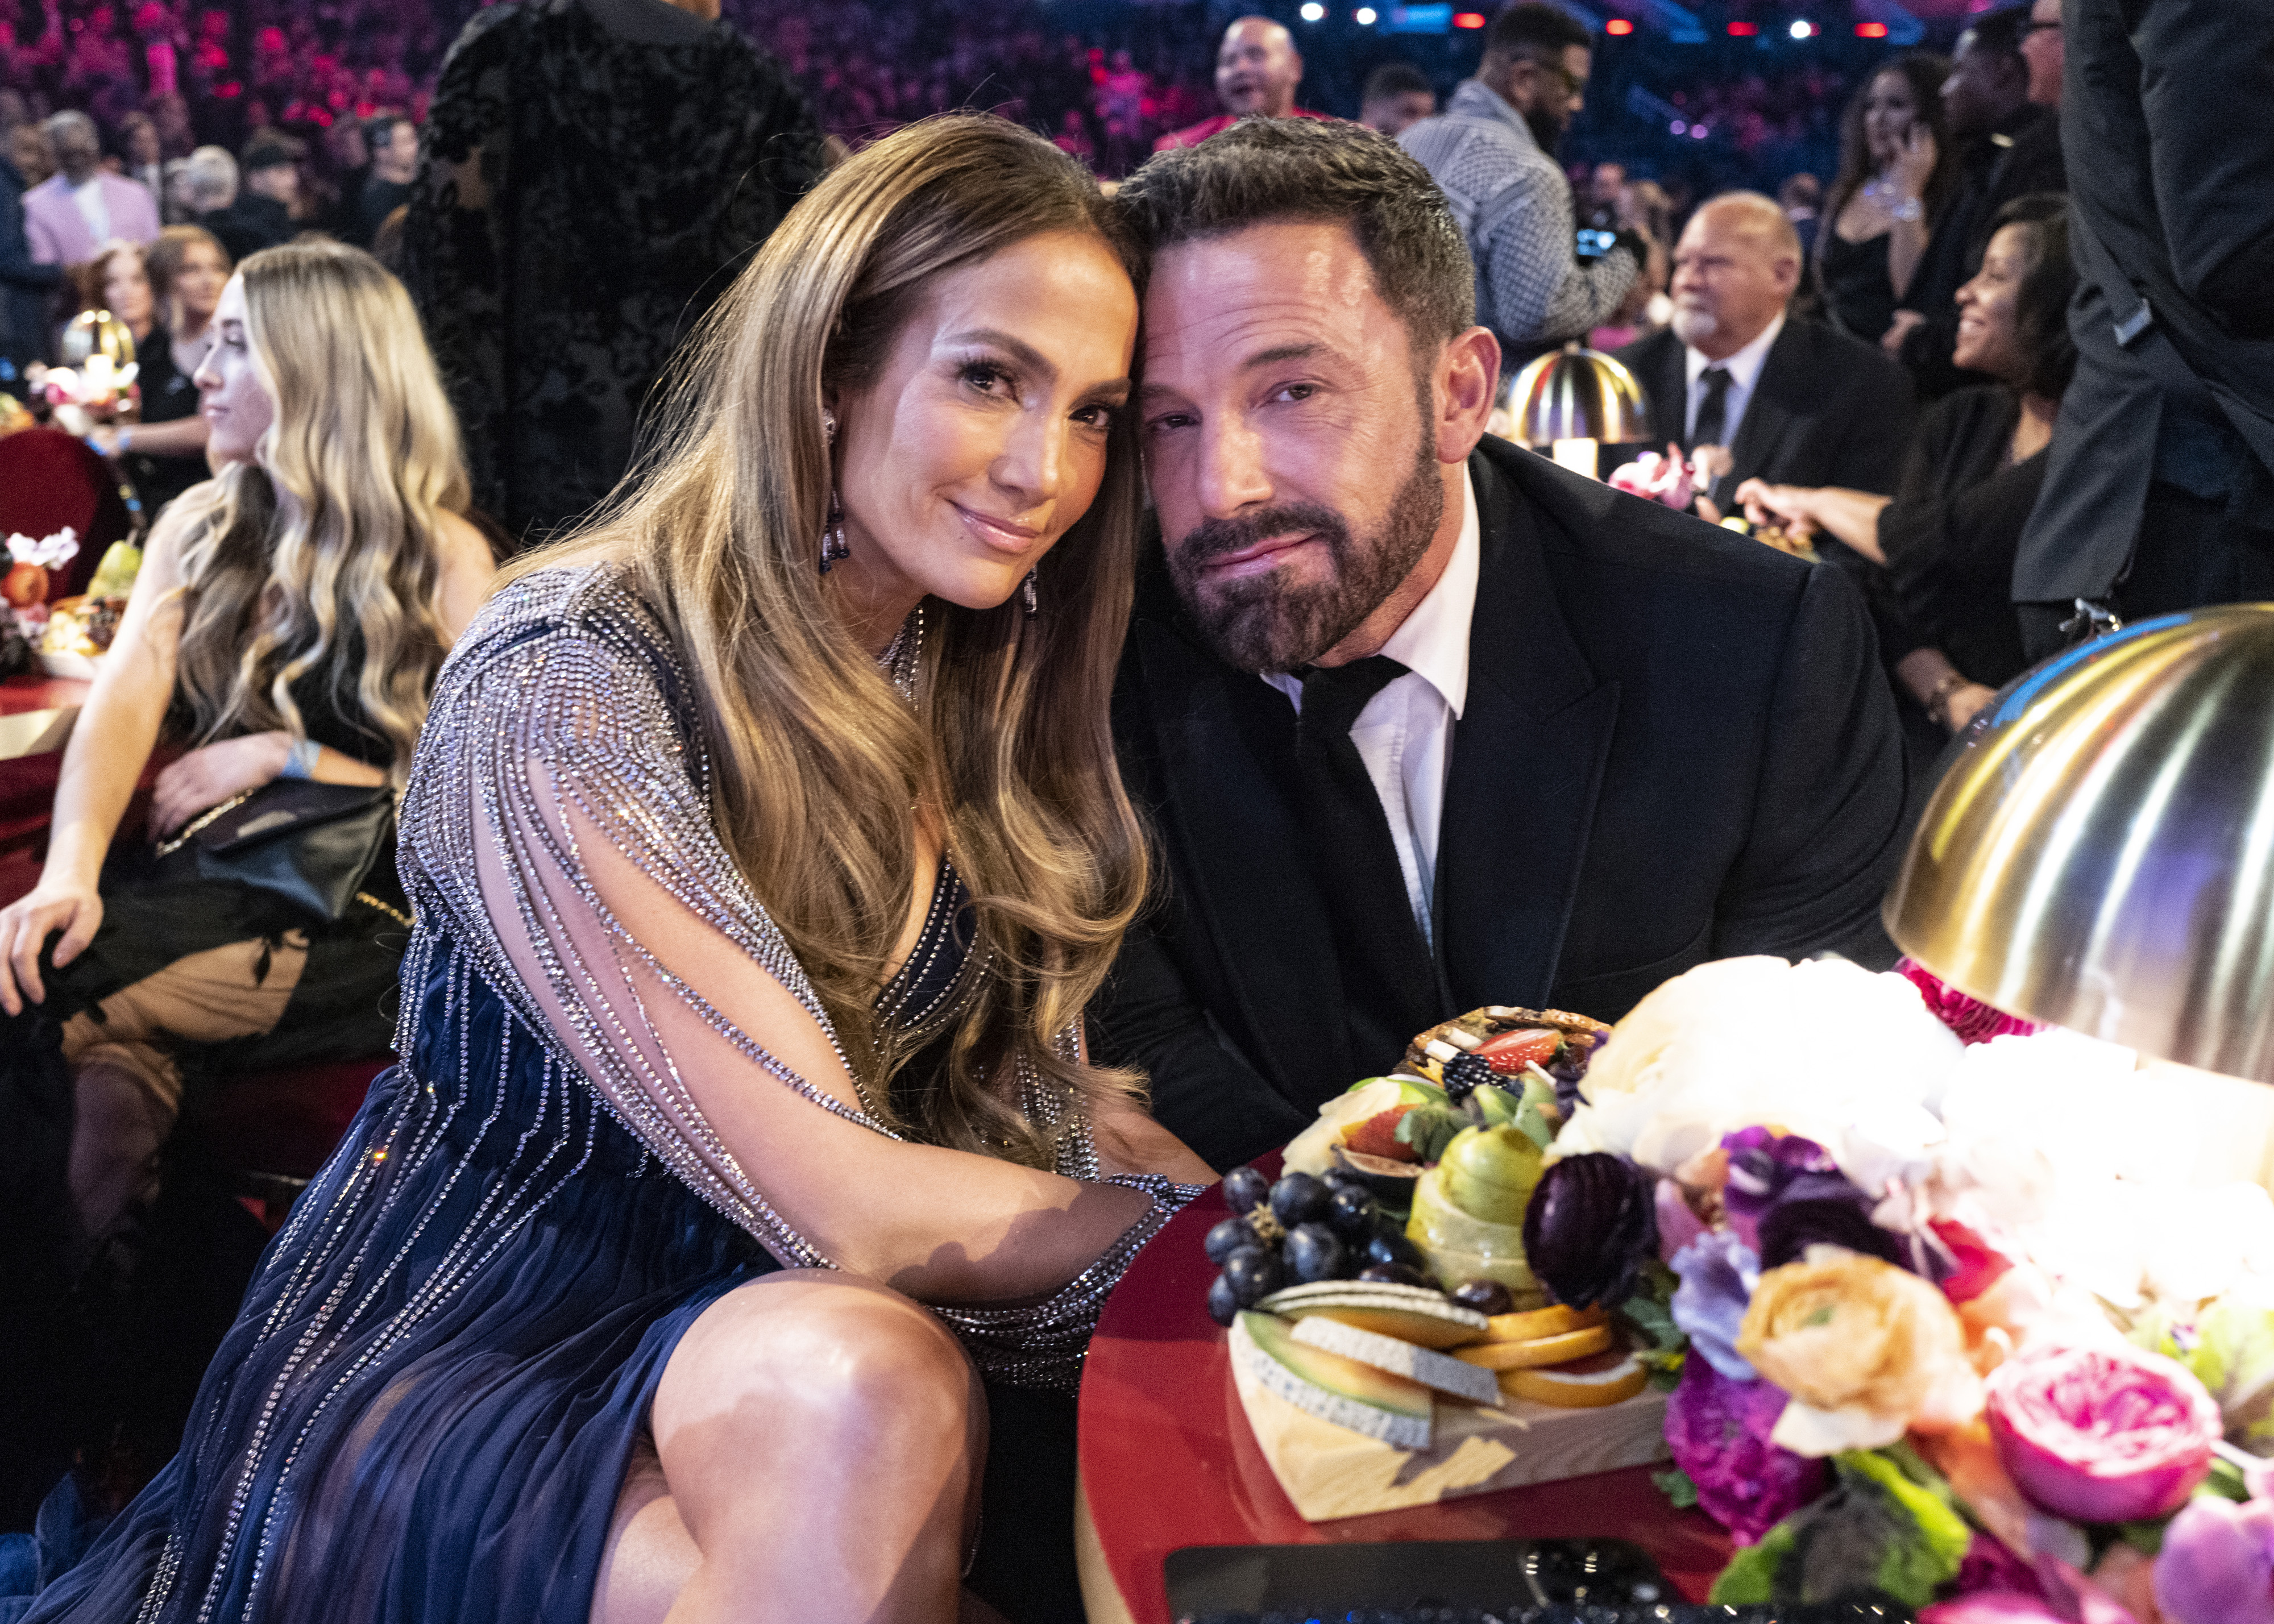 Fans online are convinced that Ben's wife JLo was angry about the post